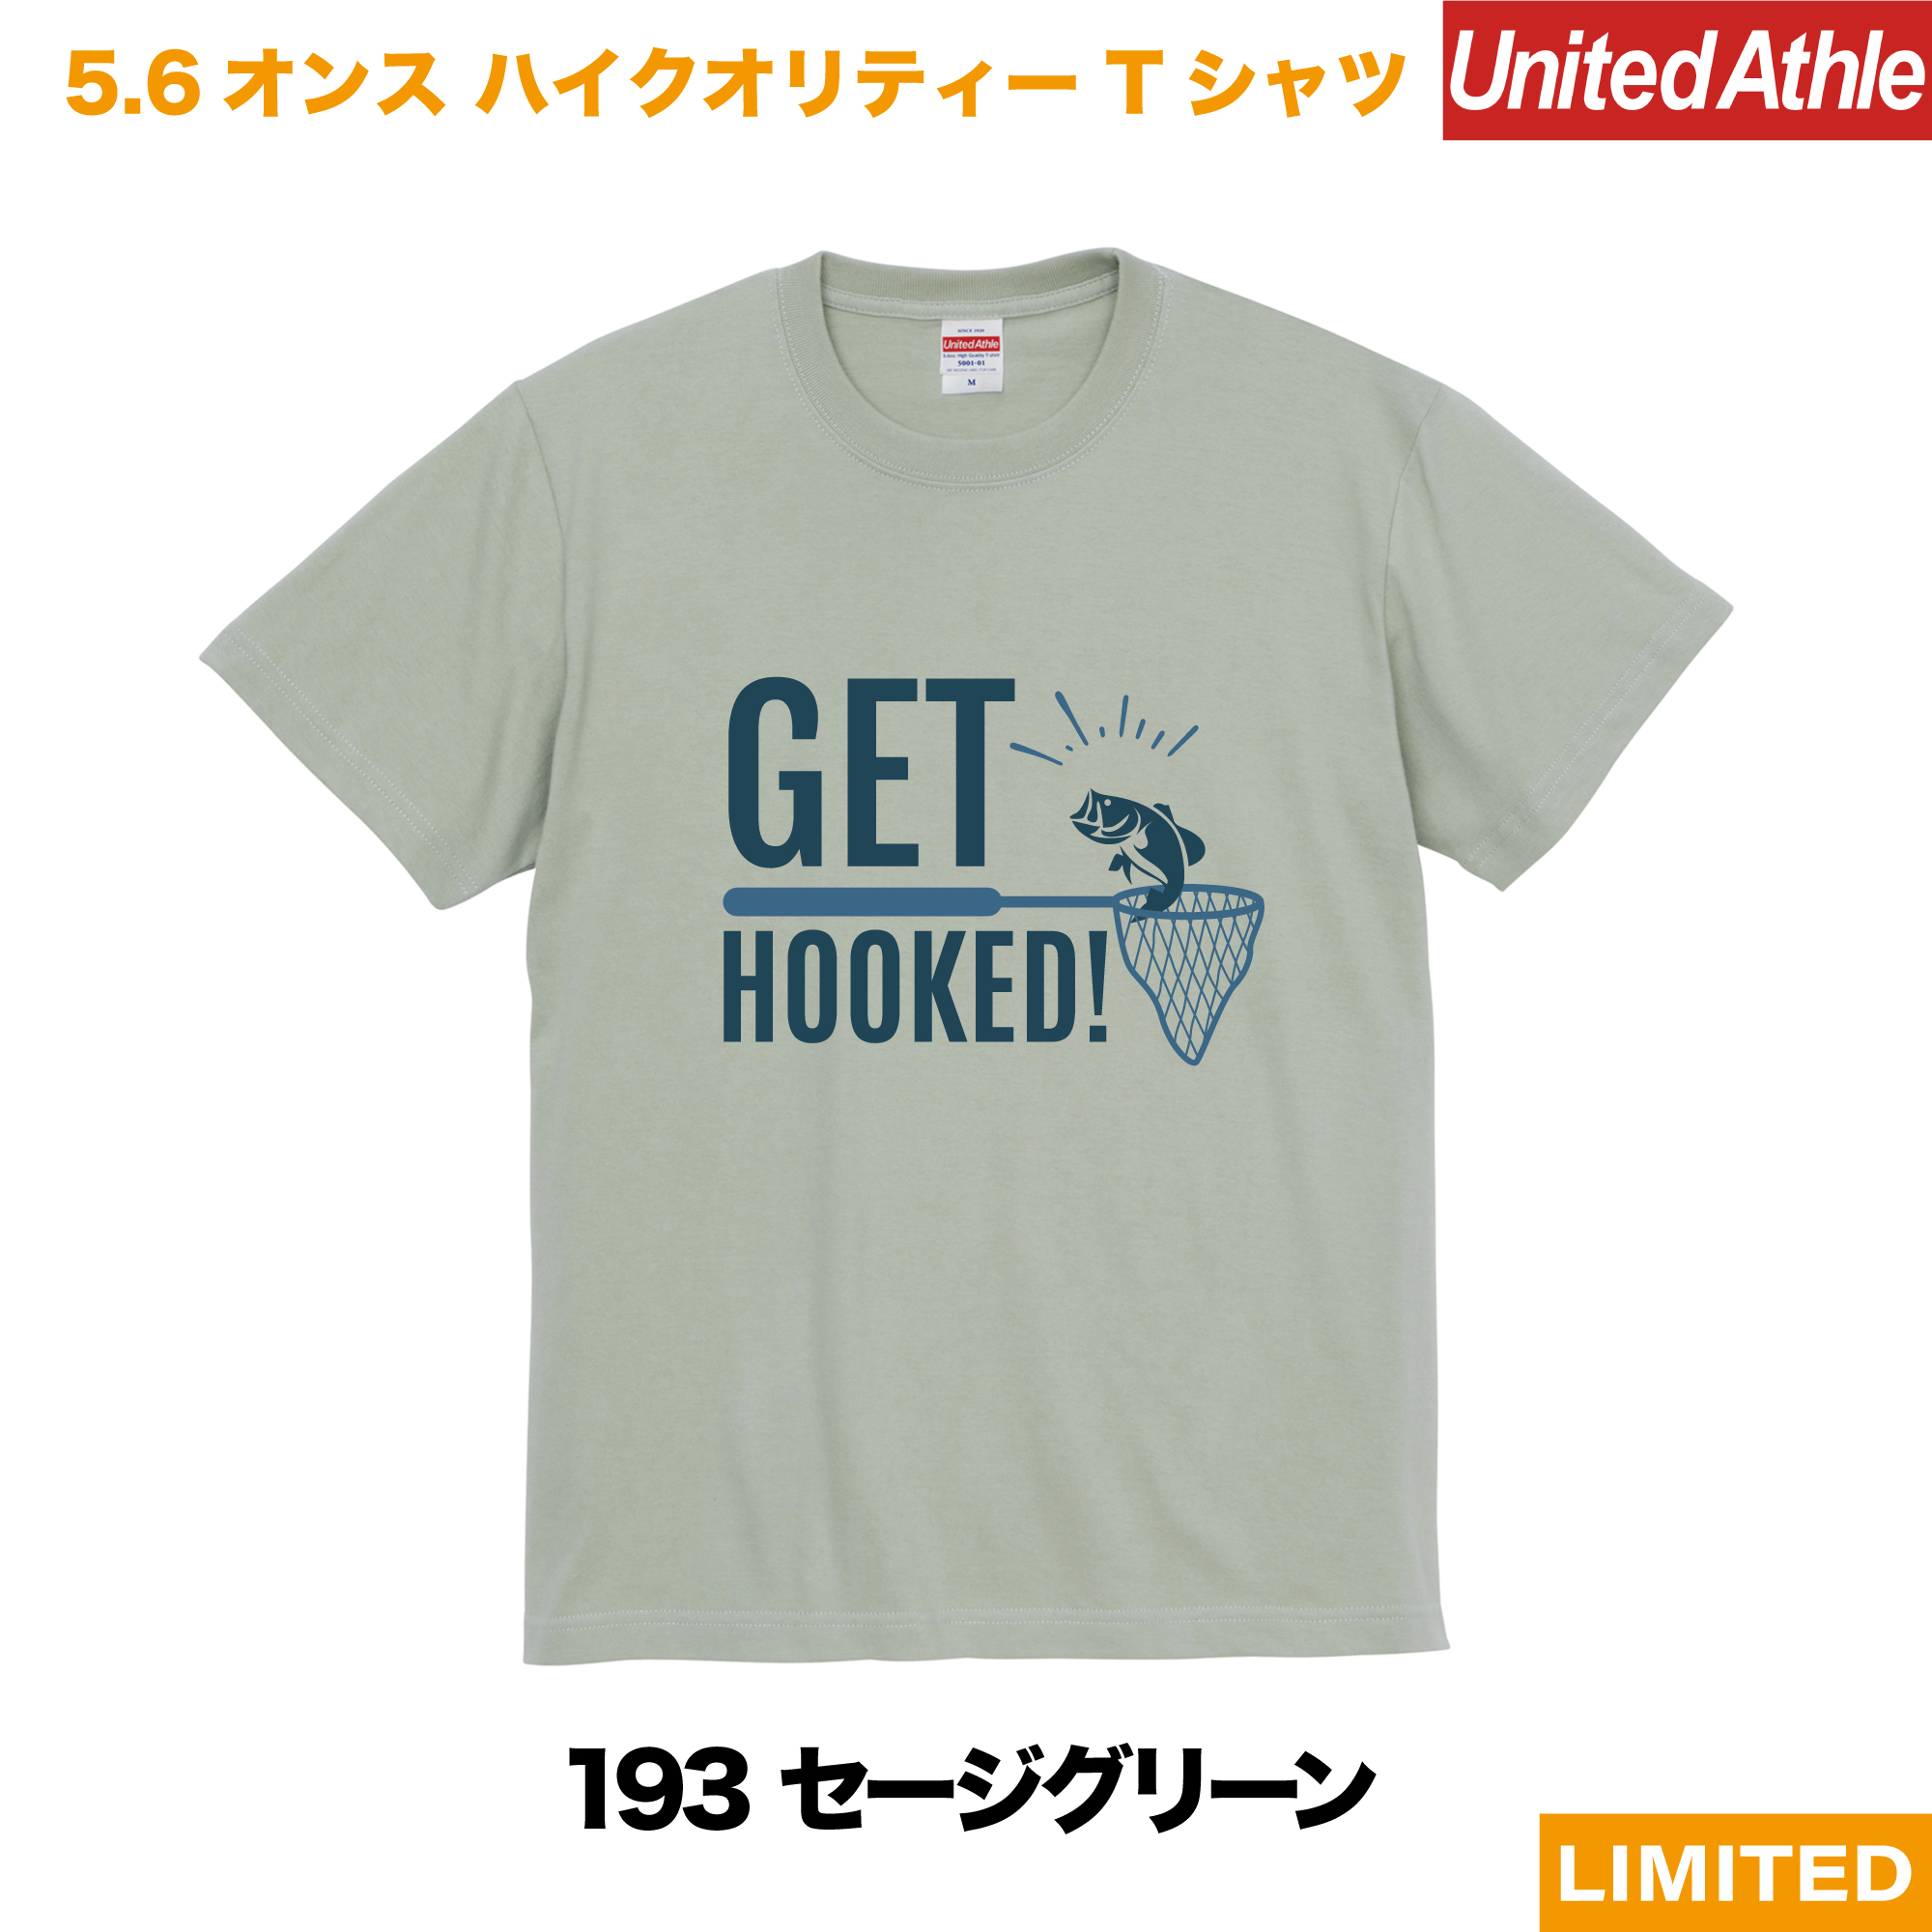 GET HOOKED　プリントTシャツ　5001-01【セージグリーン】＜アダルト＞